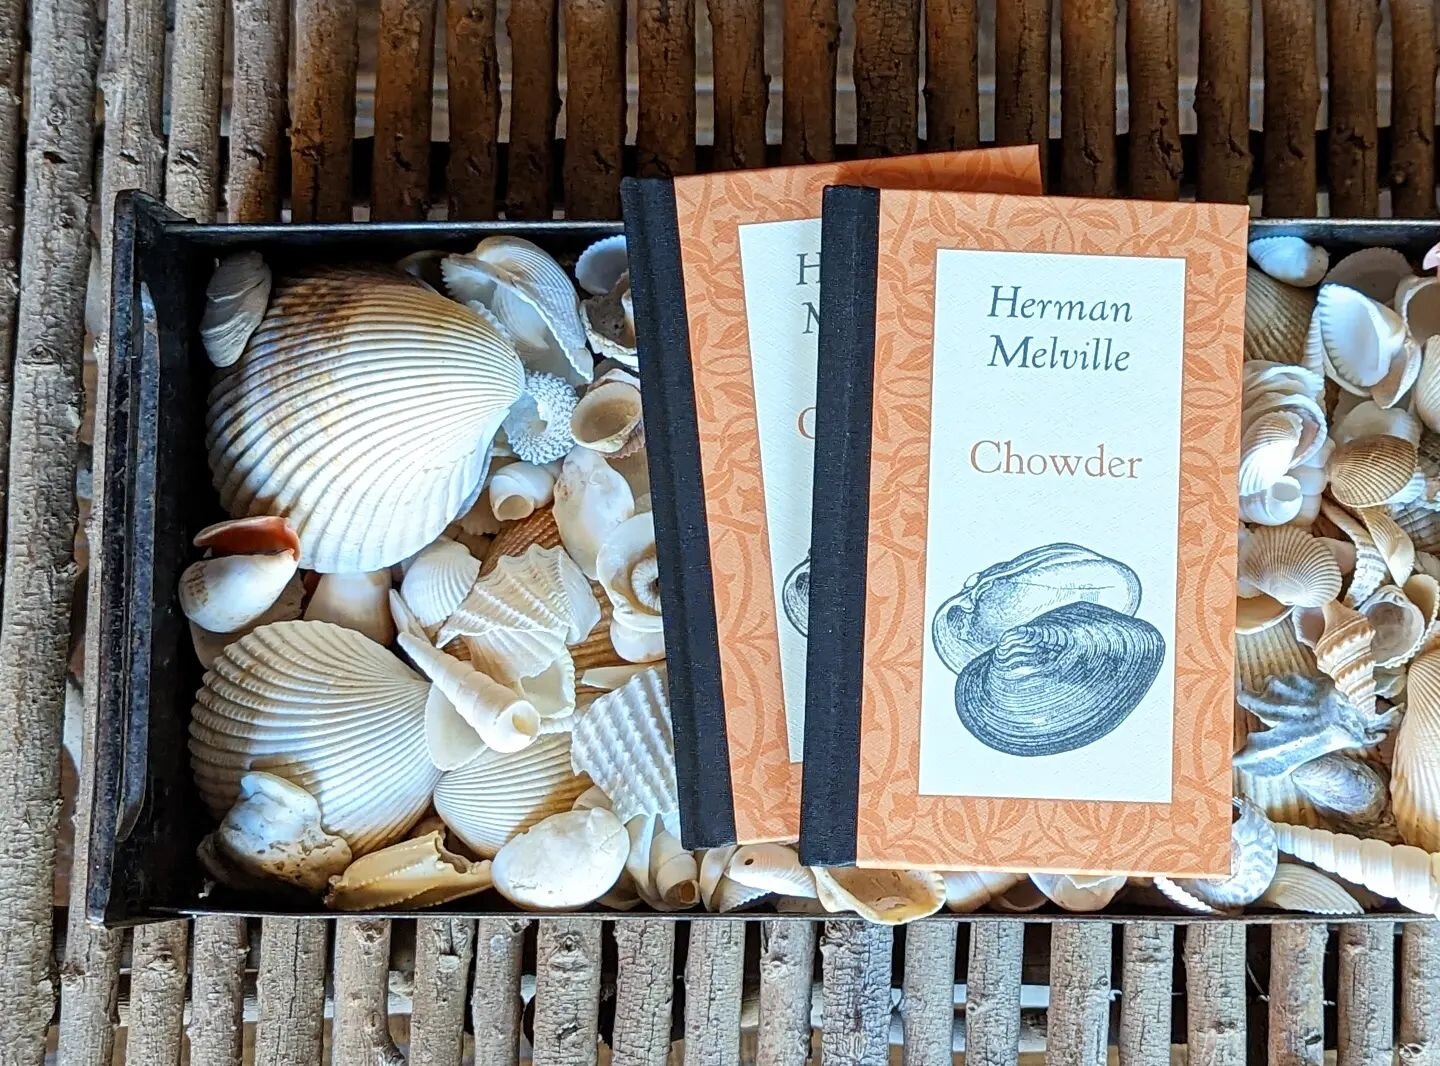 Our short books make great stocking stuffers. Chowder has been a customer favorite! 

From the publisher: 
Chowder is chapter fifteen from one of the greatest works of American literature, Herman Melville's Moby Dick. It is so beautifully written, so